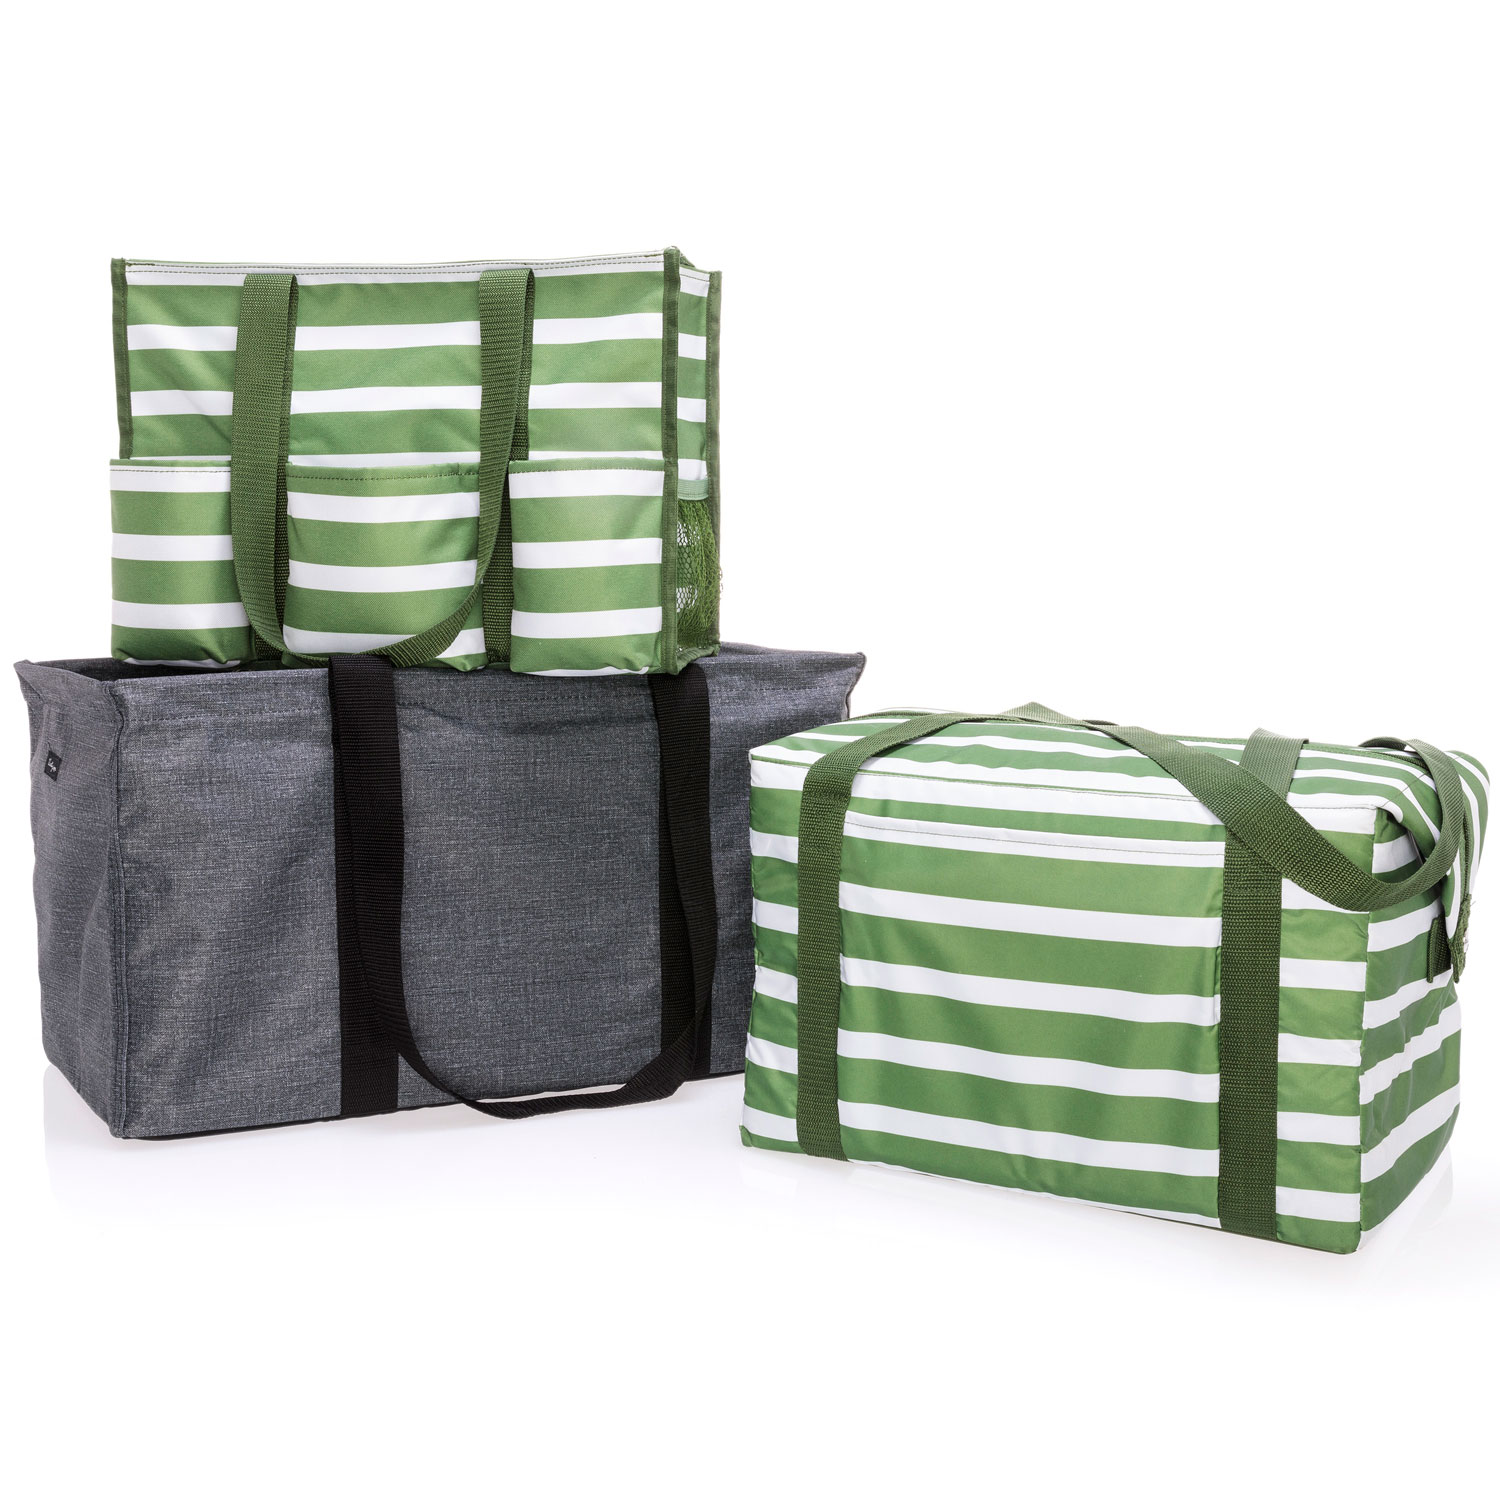 thirty-one, Bags, Thirtyone Green And Blue Striped Organizing Utility Tote  Green Handles Nwot